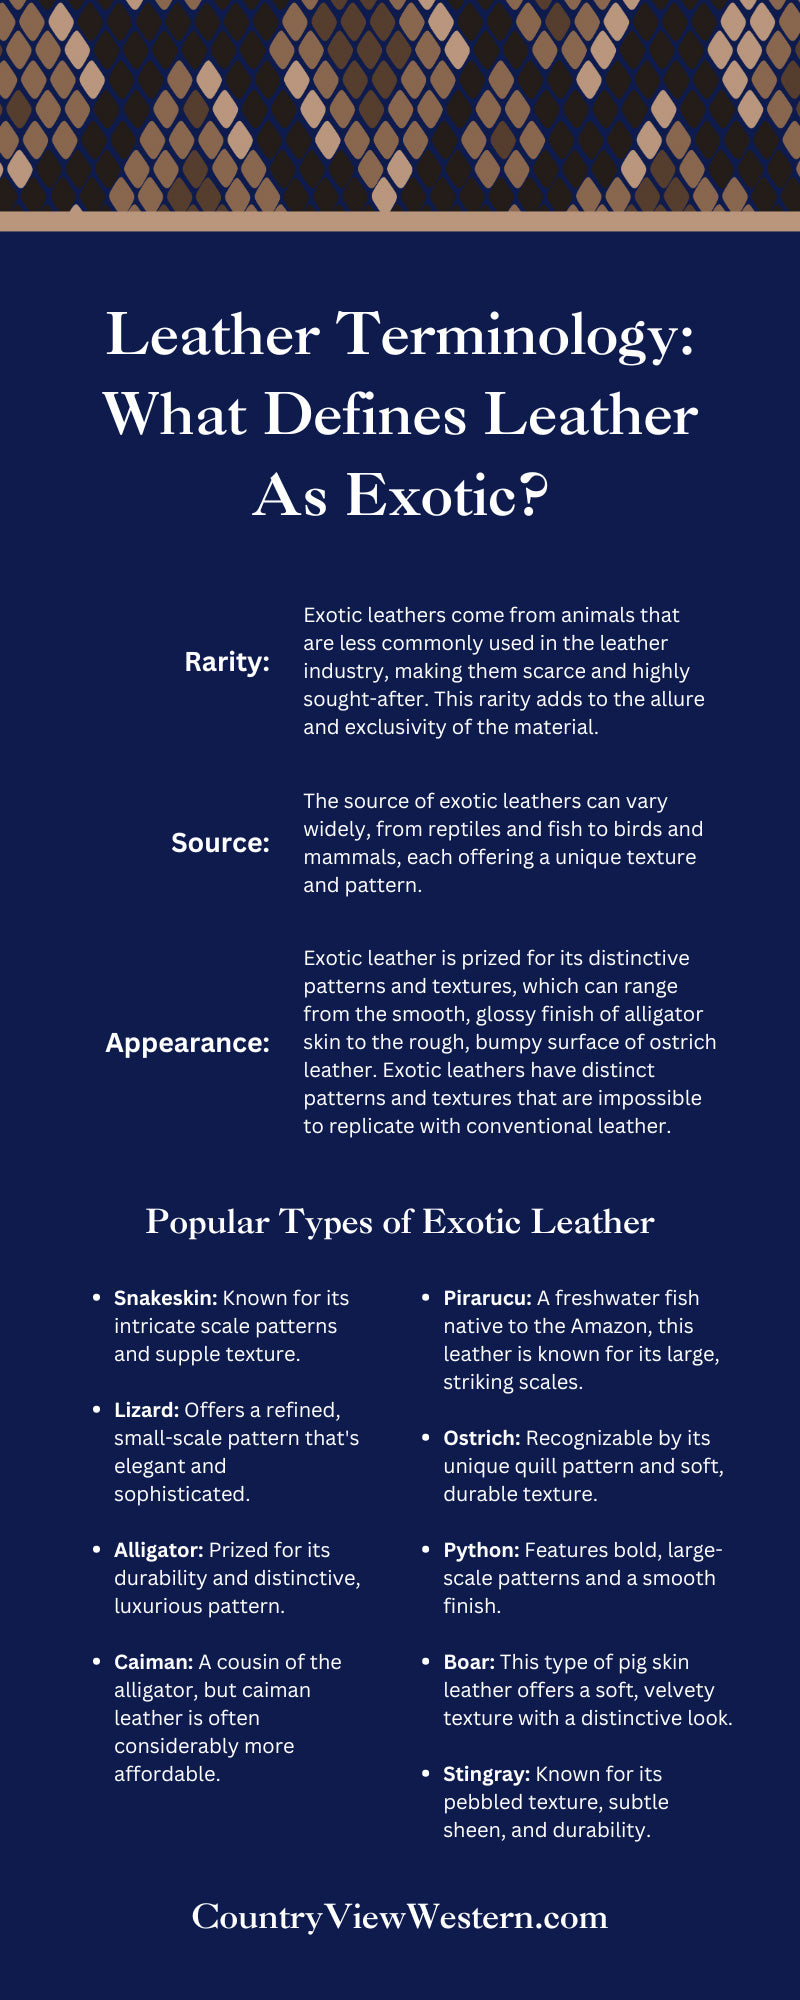 Leather Terminology: What Defines Leather As Exotic?